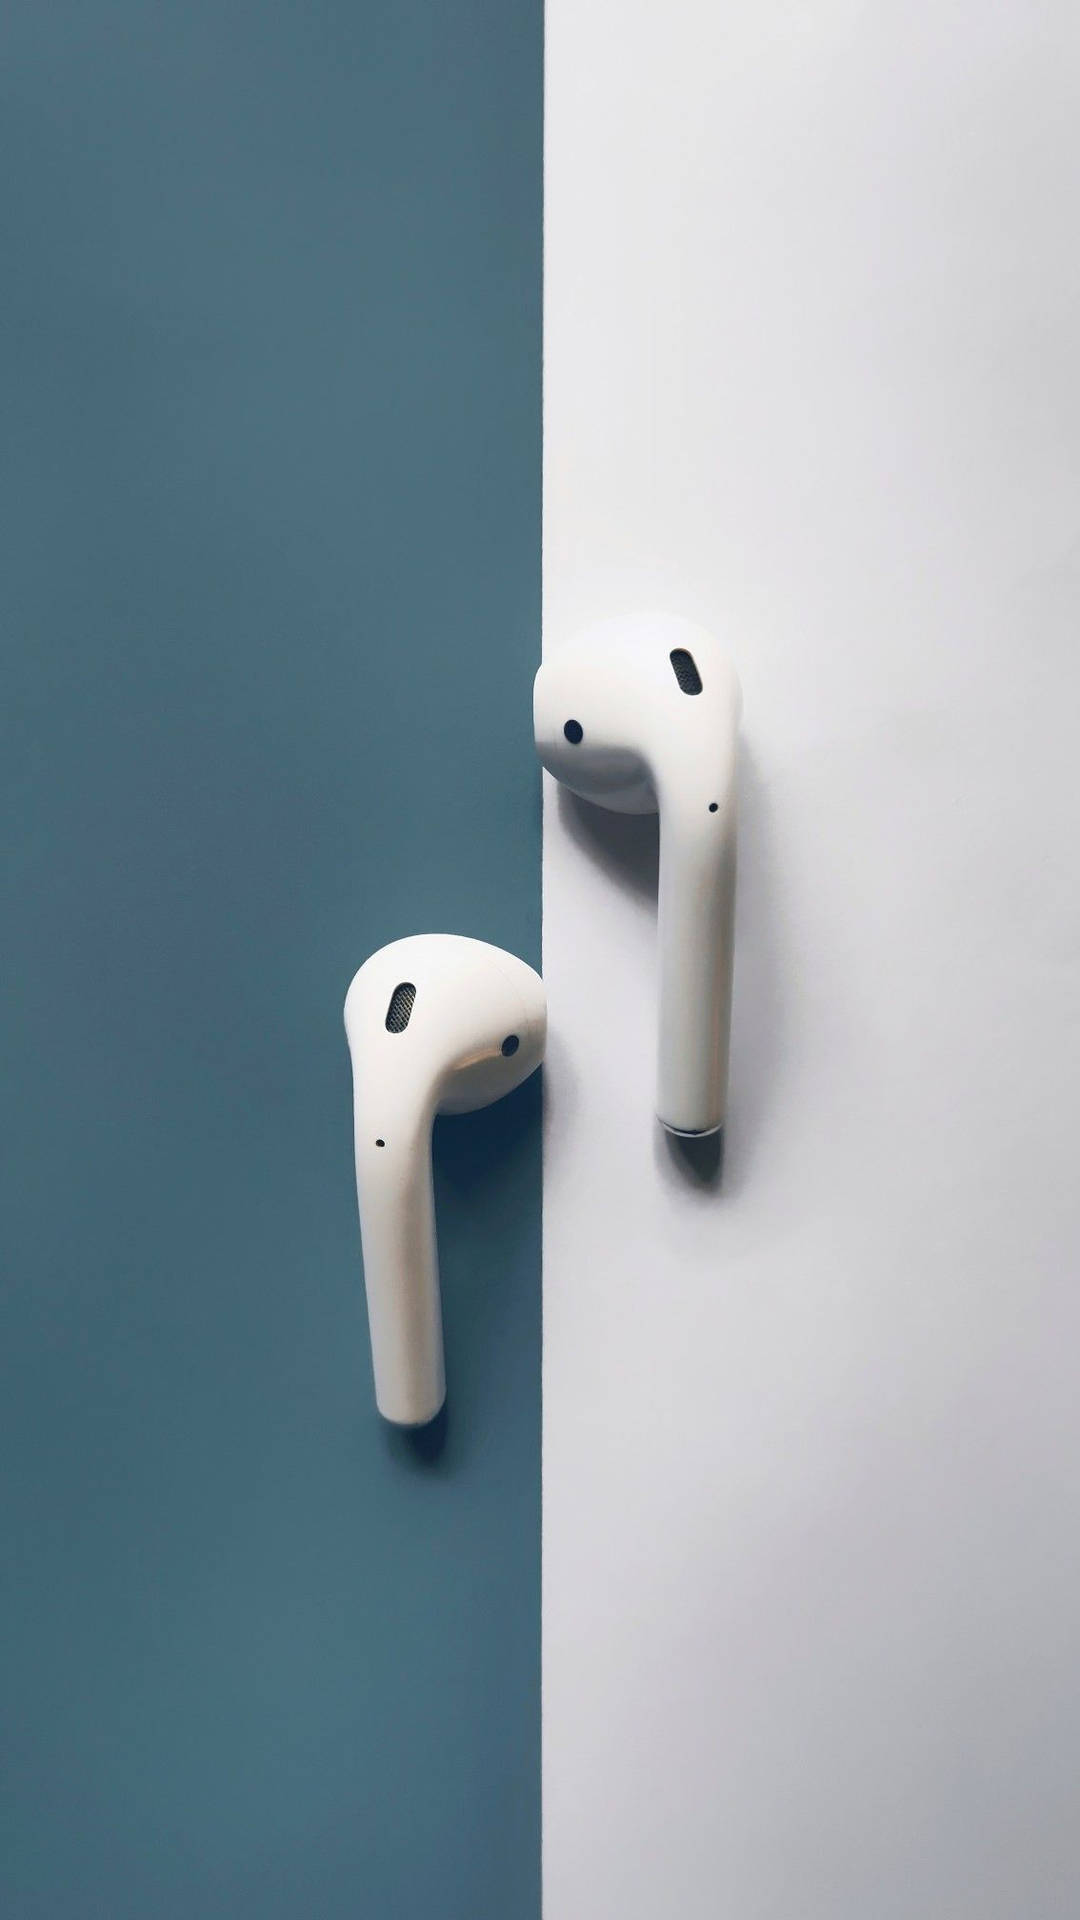 HD wallpaper Apple AirPods with white charging case in selective focus  photography  Wallpaper Flare